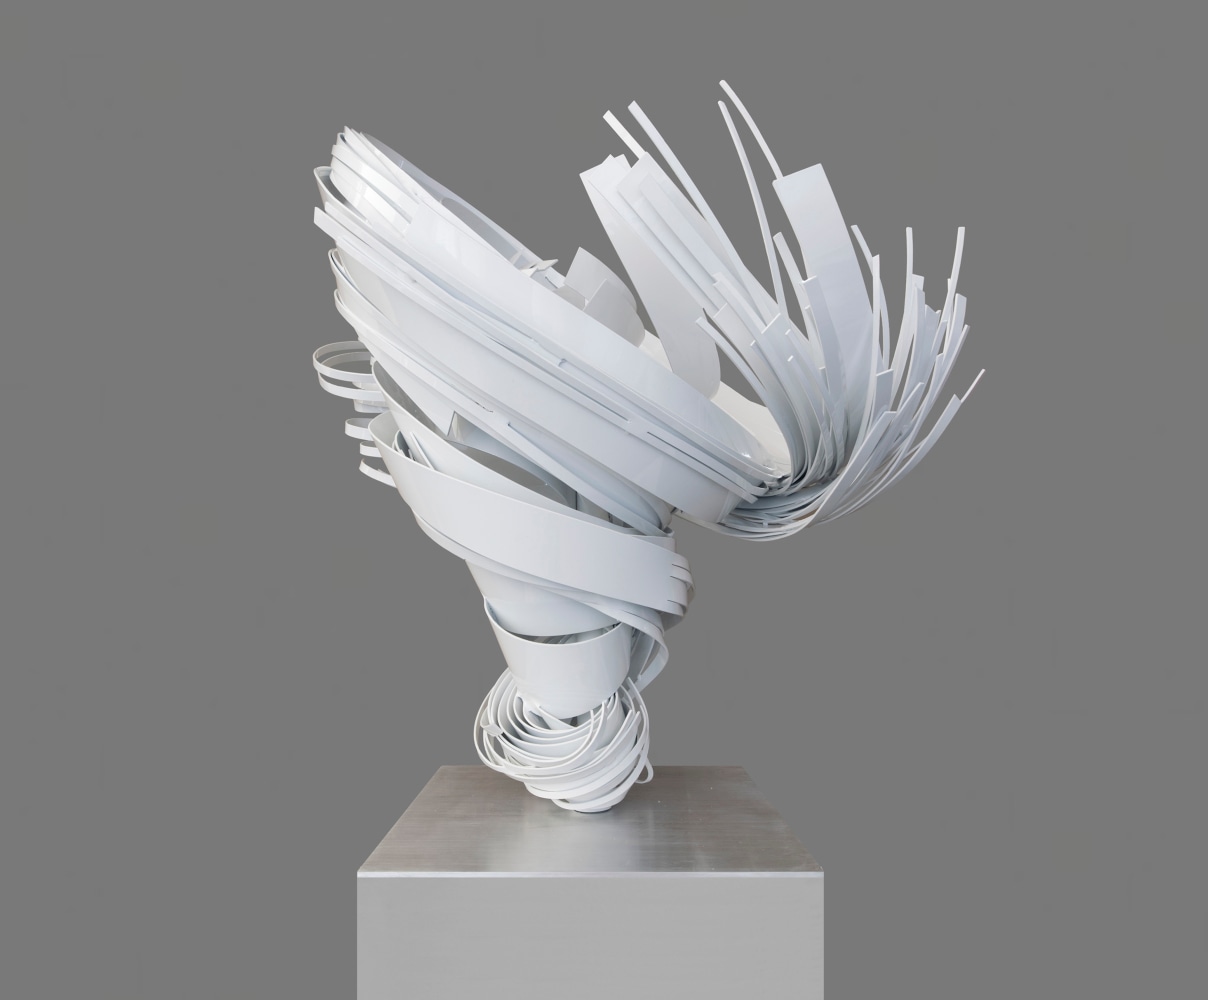 White powder coated aluminum sculpture of a small twist by Alice Aycock